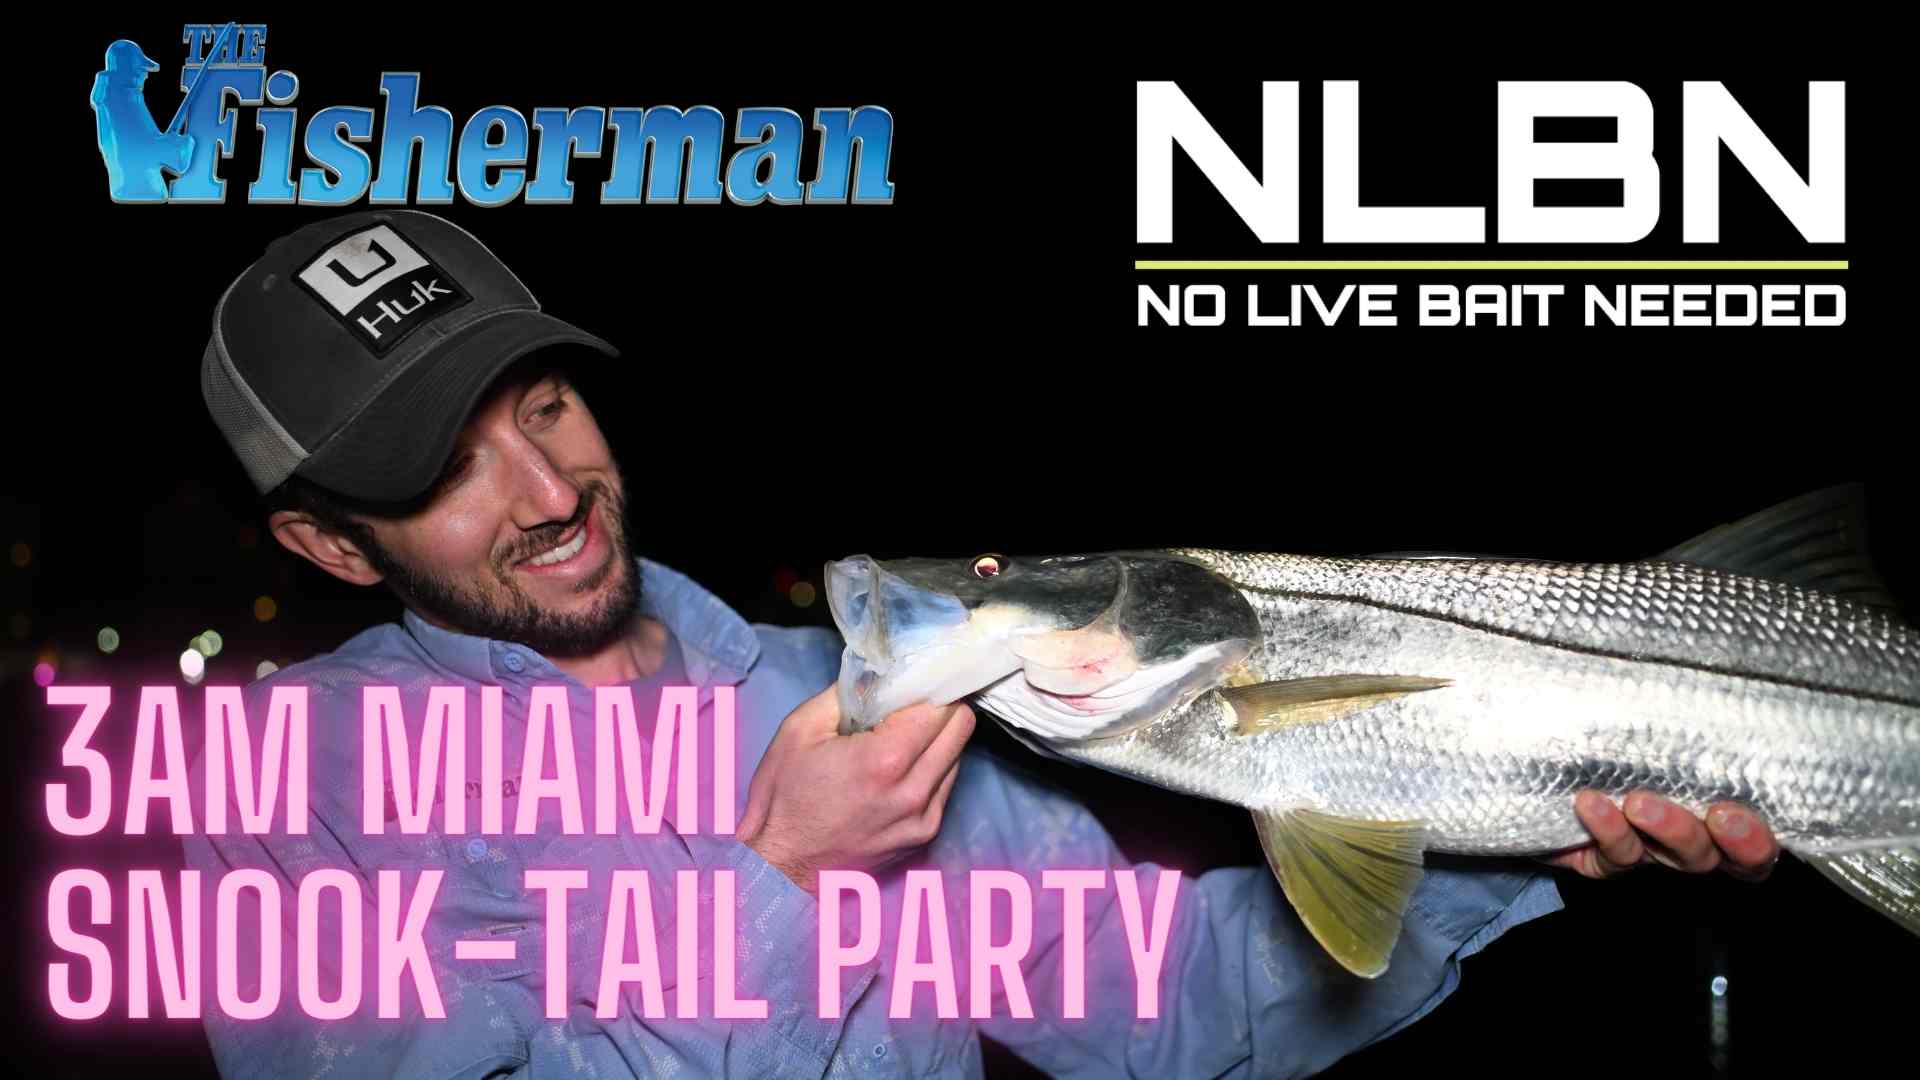 3am Miami Snook-Tail Party - NLBN & The Fisherman - The Fisherman